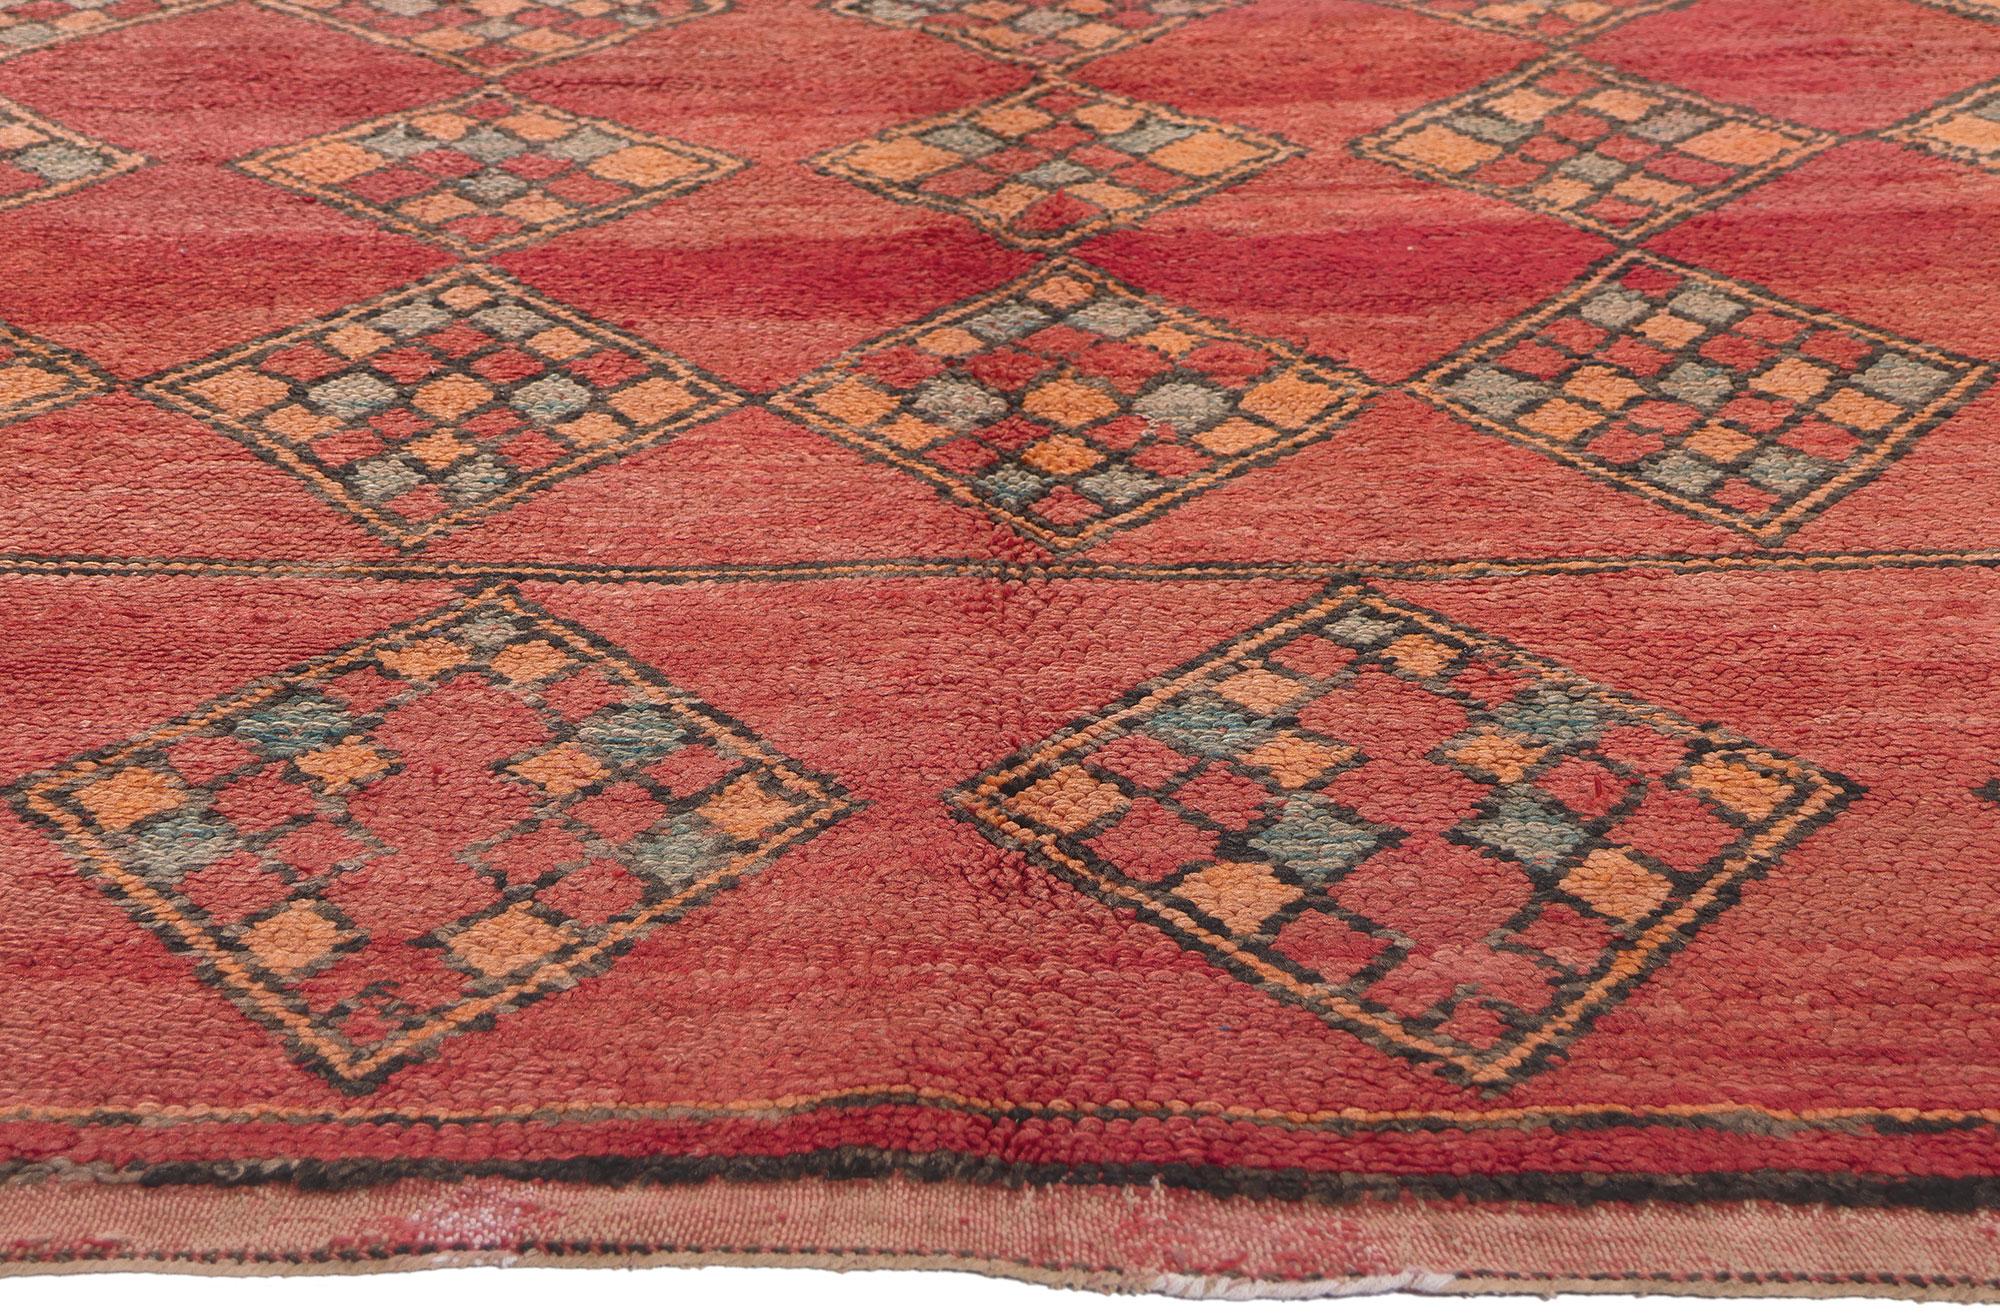 Vintage Boujad Moroccan Rug, Boho Chic Meets Tribal Enchantment In Good Condition For Sale In Dallas, TX